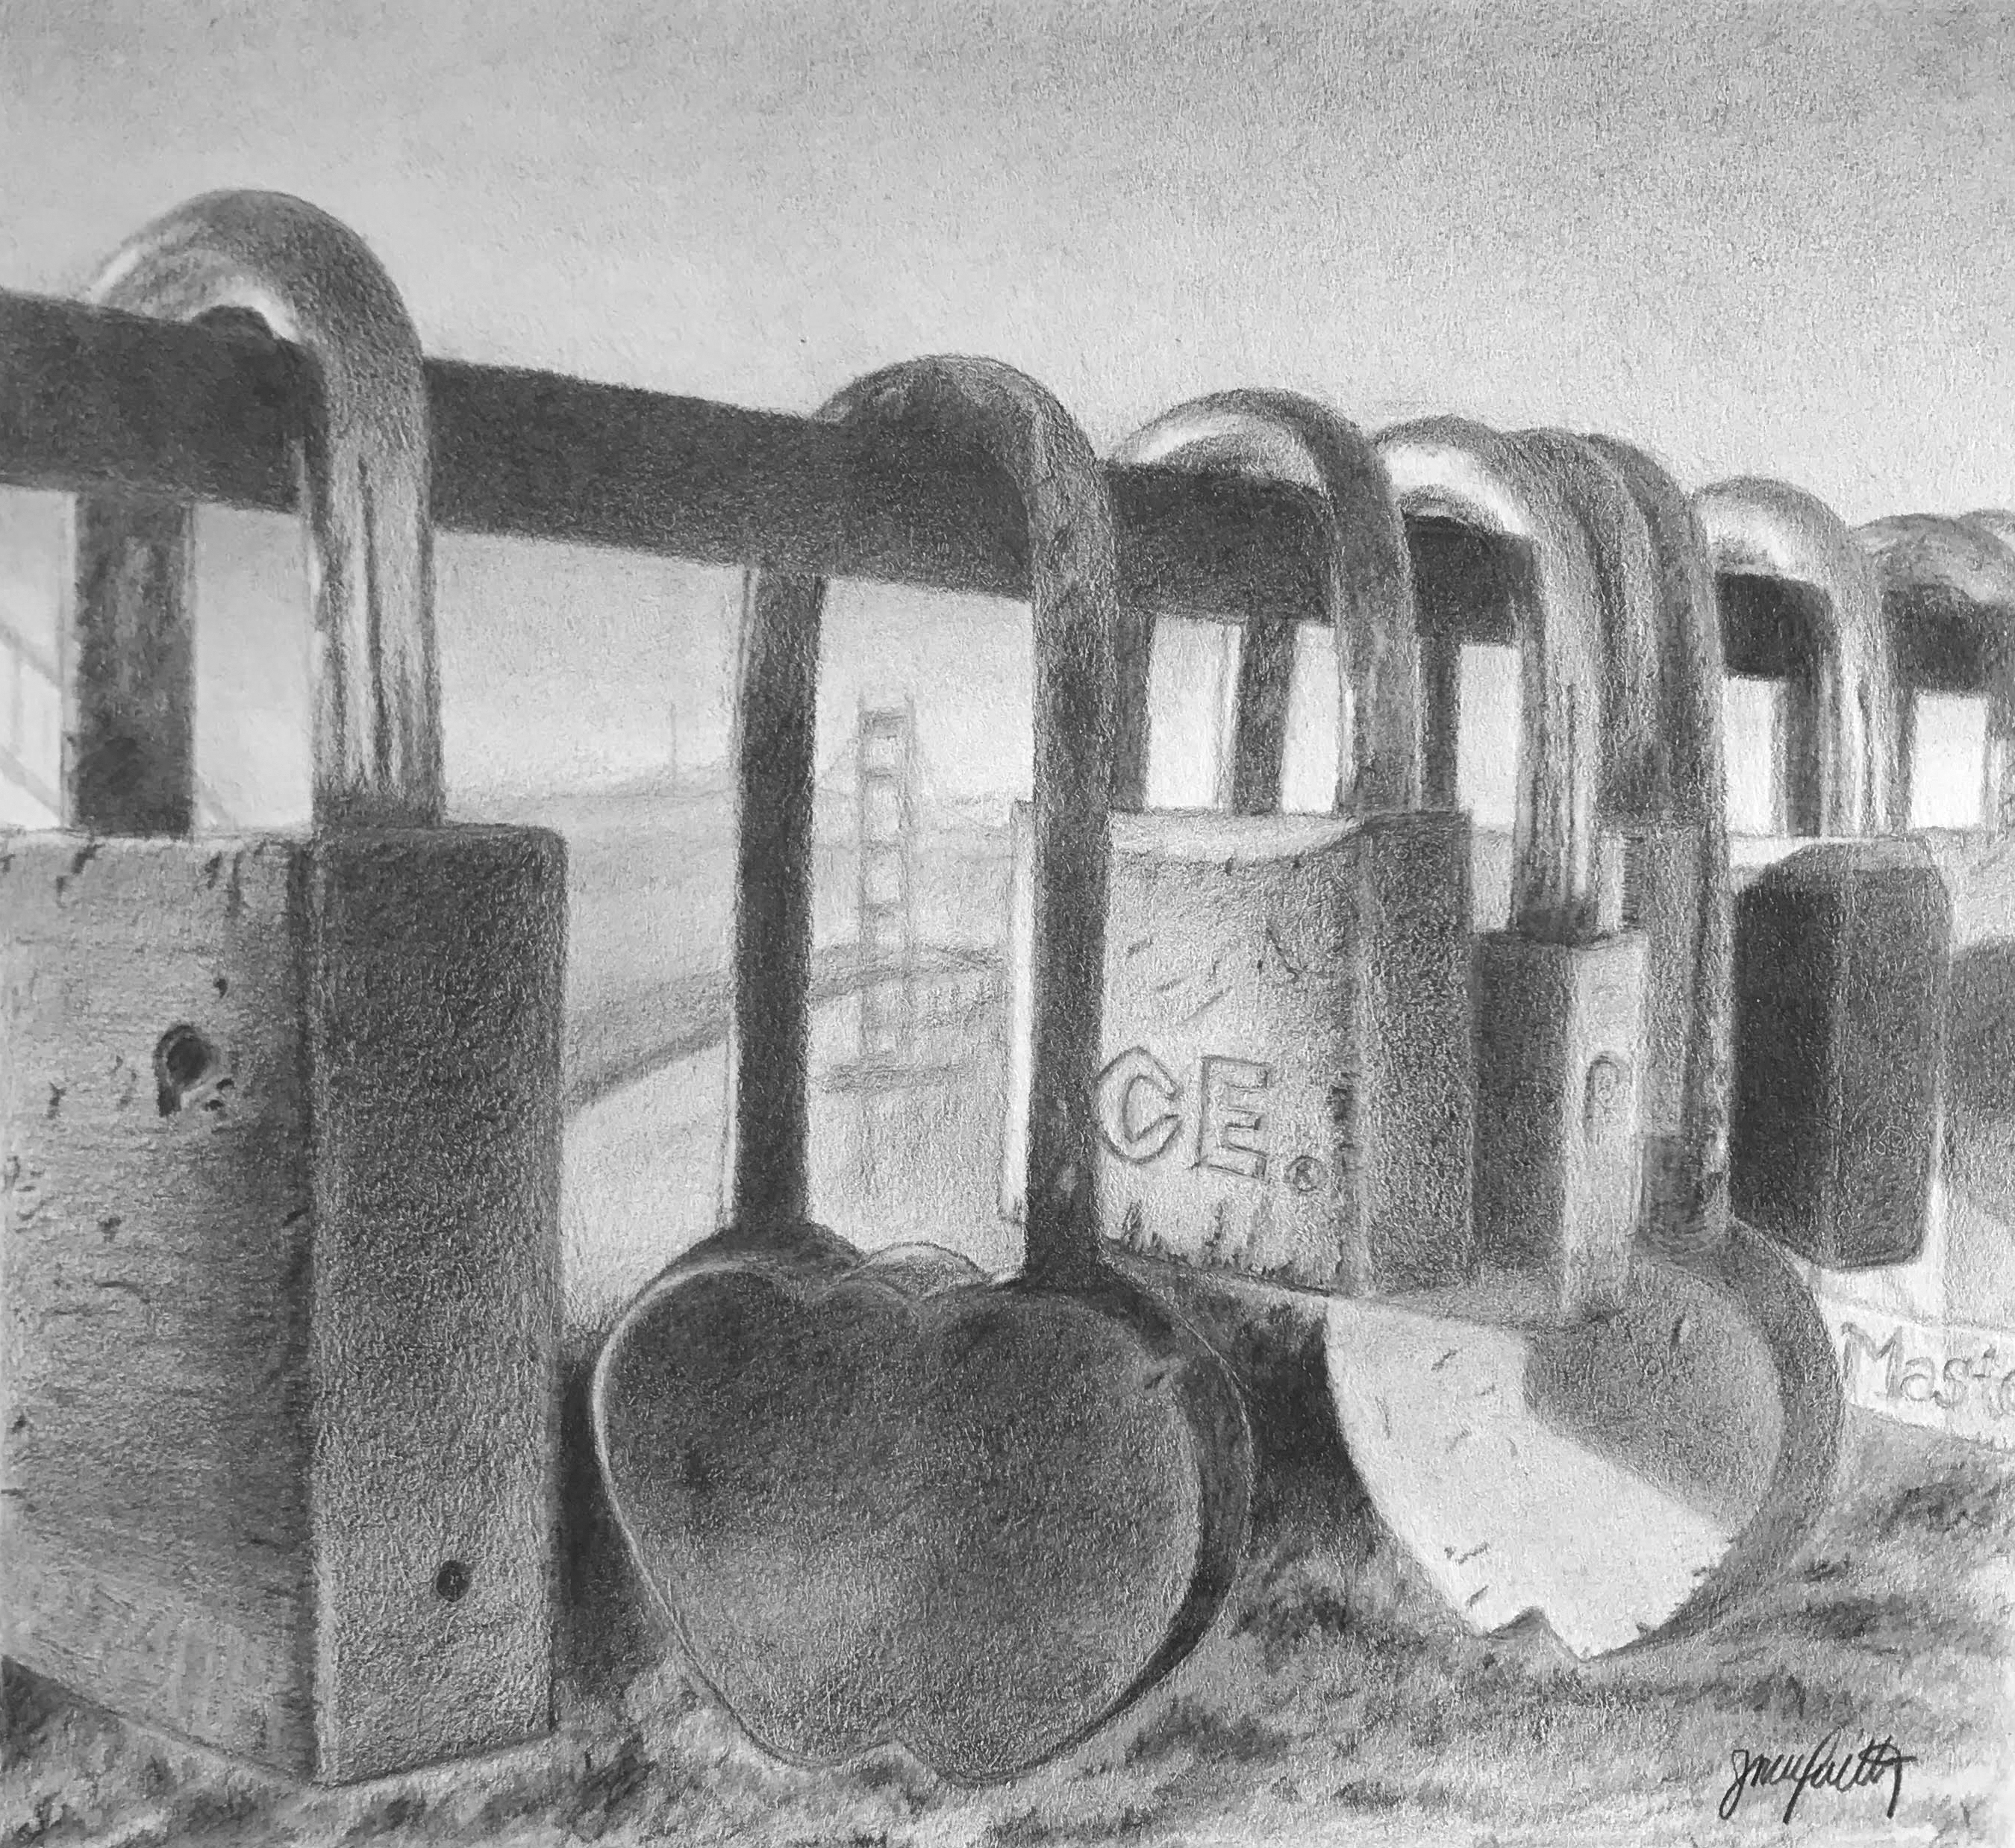 Graphite Drawing of locks on a bar, testimonial from student, Iris Toombs of RL Caldwell Studio